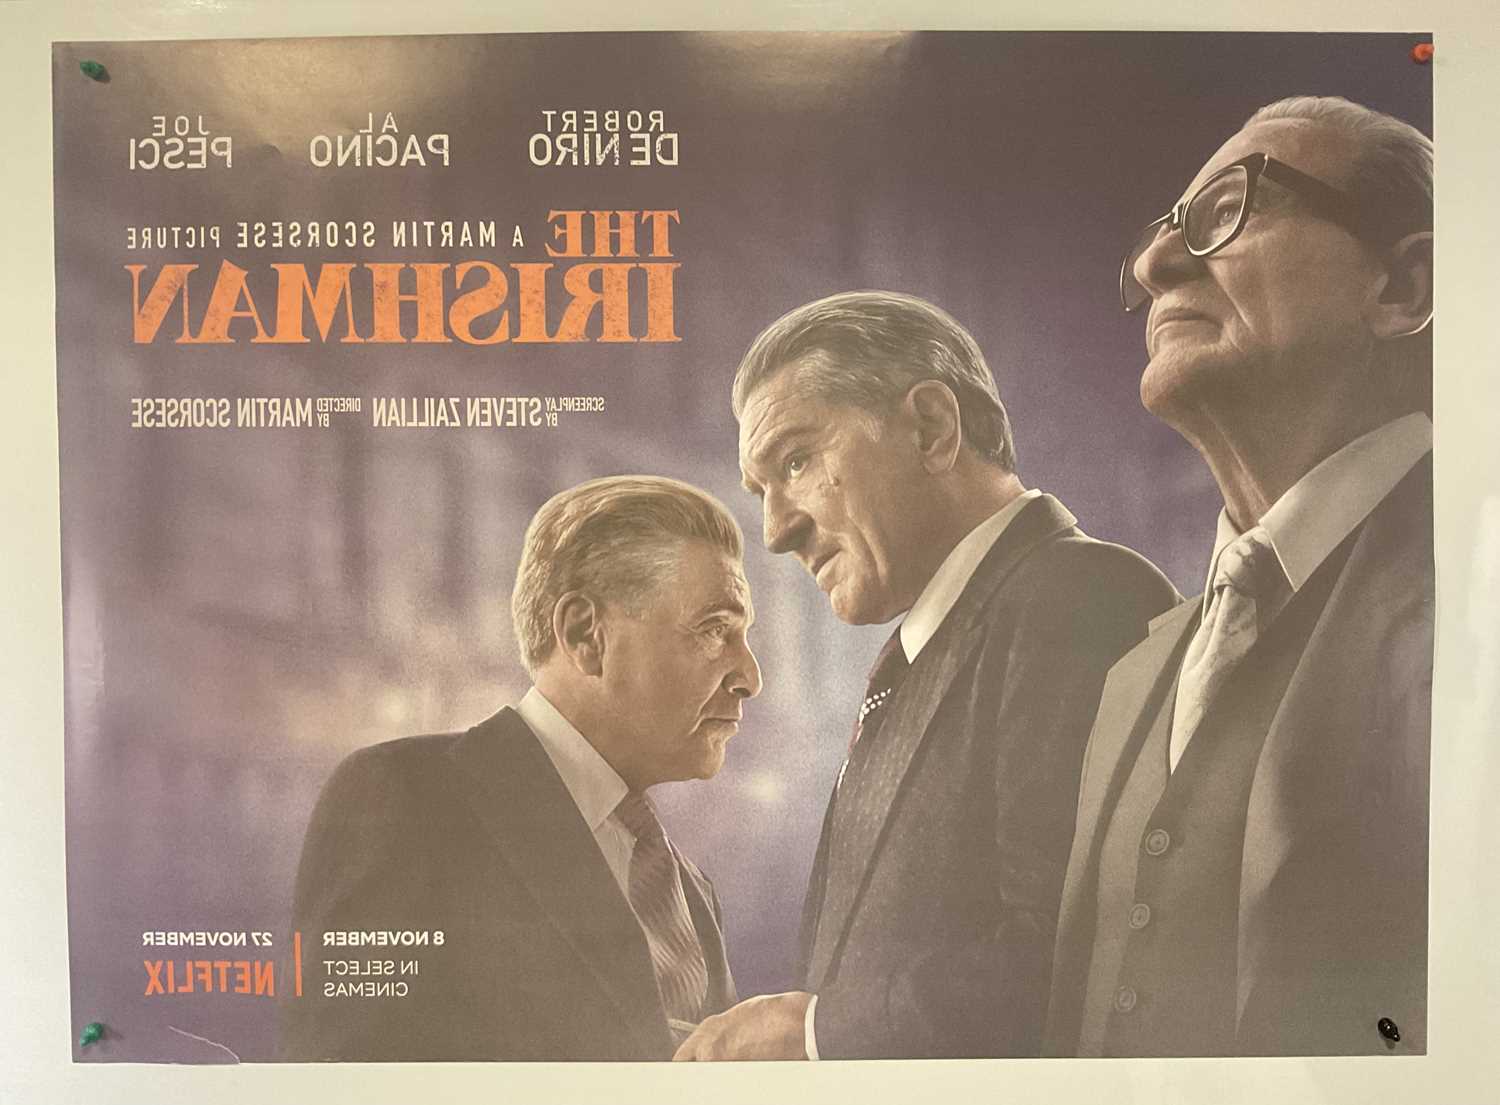 THE IRISHMAN (2019) UK Quad film poster, extremely scarce due to a very limited theatrical release - Image 6 of 7